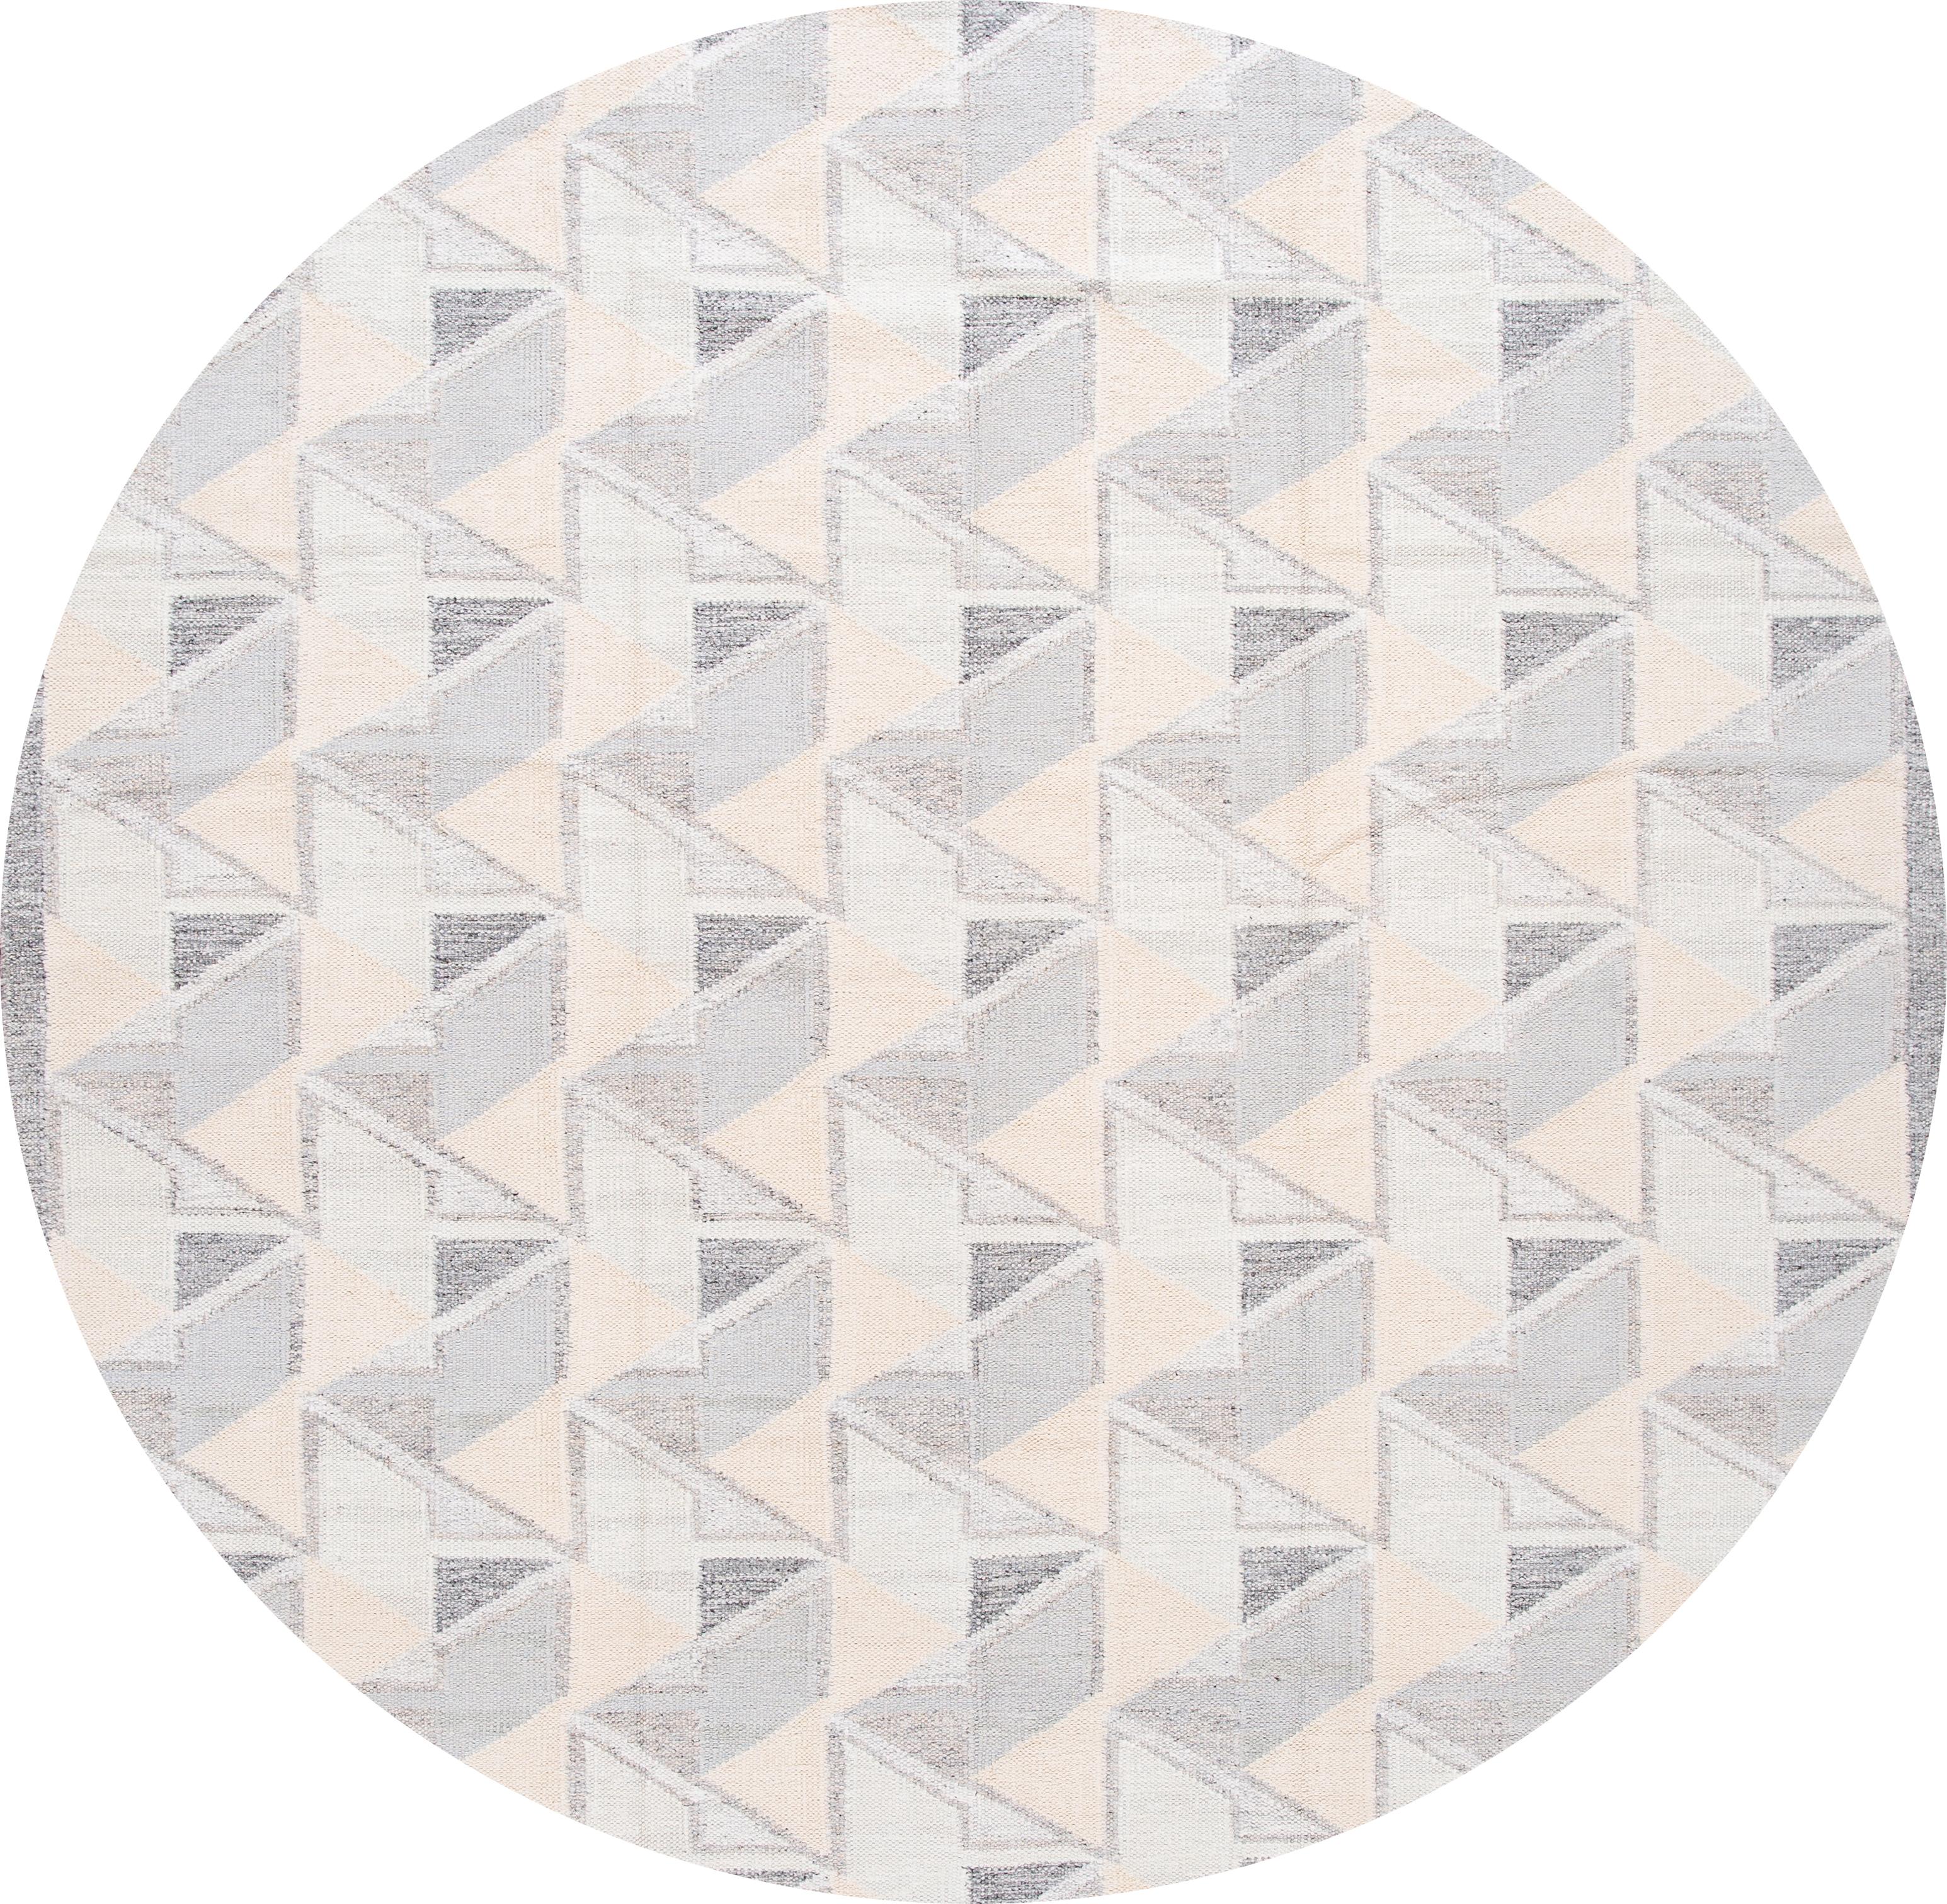 Beautiful 21st century modern Swedish hand knotted wool rug with an ivory field, beige, and gray accents in an all-over geometric design

This rug measures: 10' x 13' 10